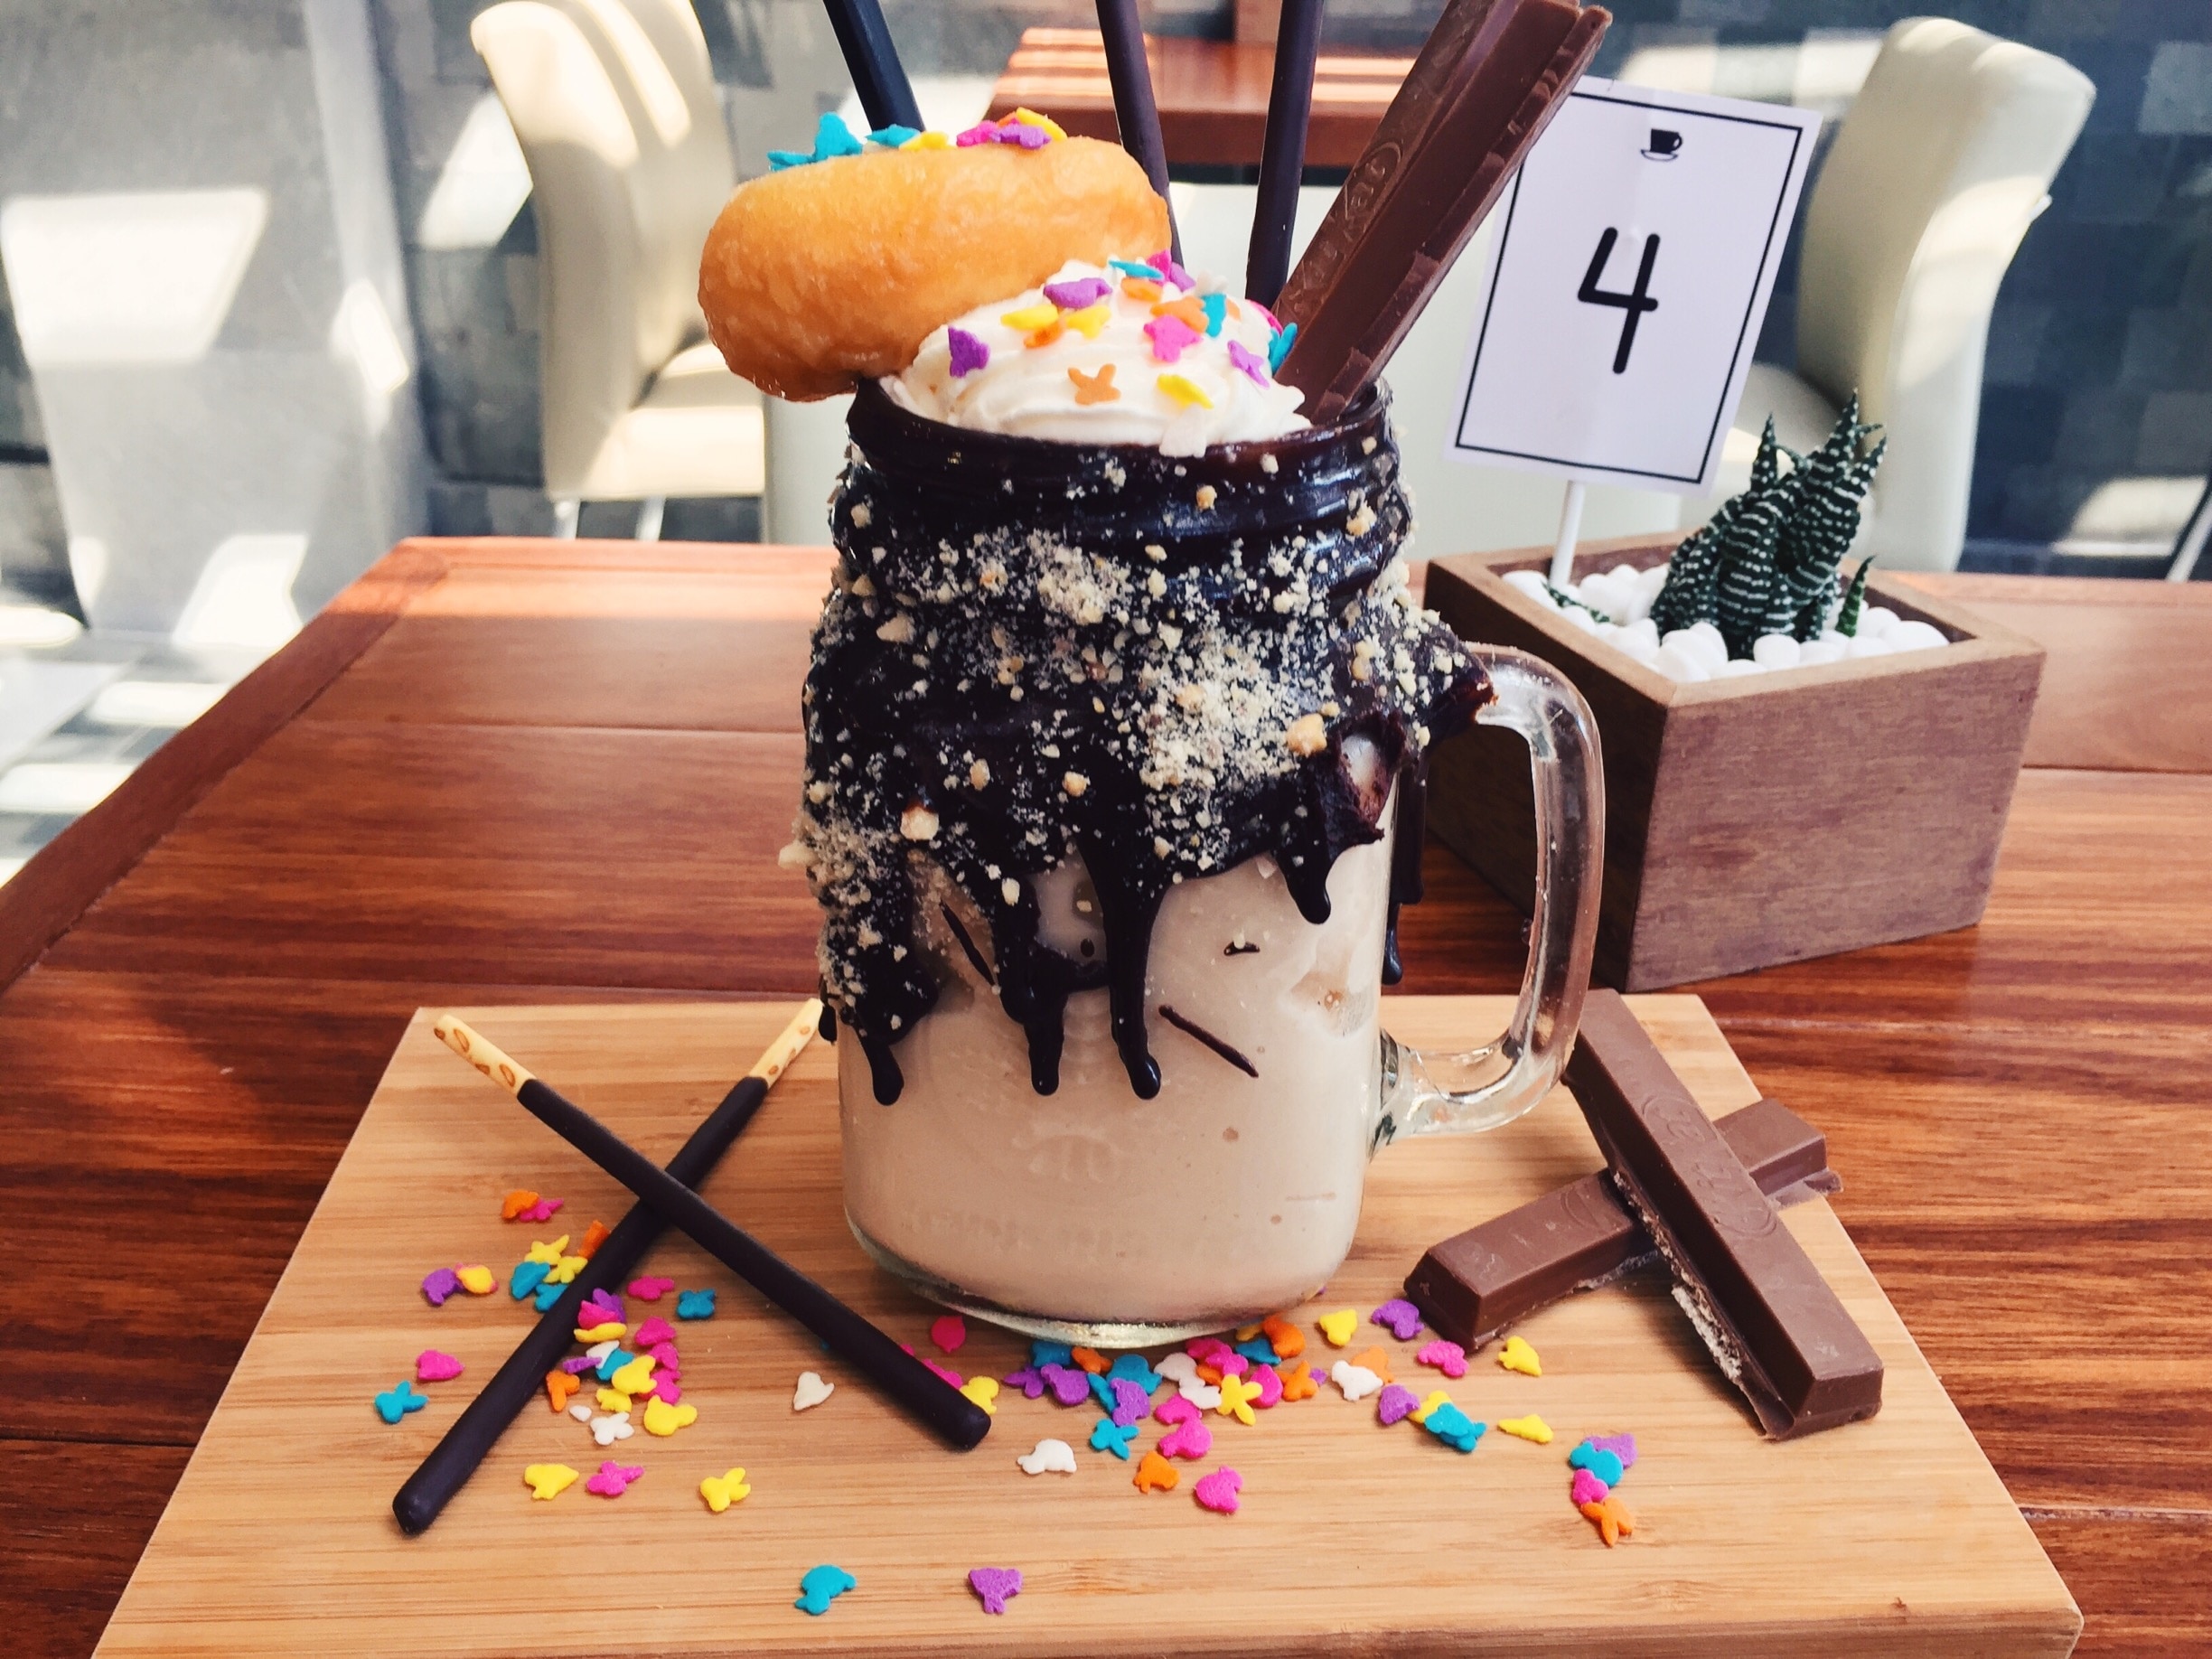 Revayah Coffee is my new favorite bakery! From delicious coffee to epic freakshakes, you won't leave hungry!